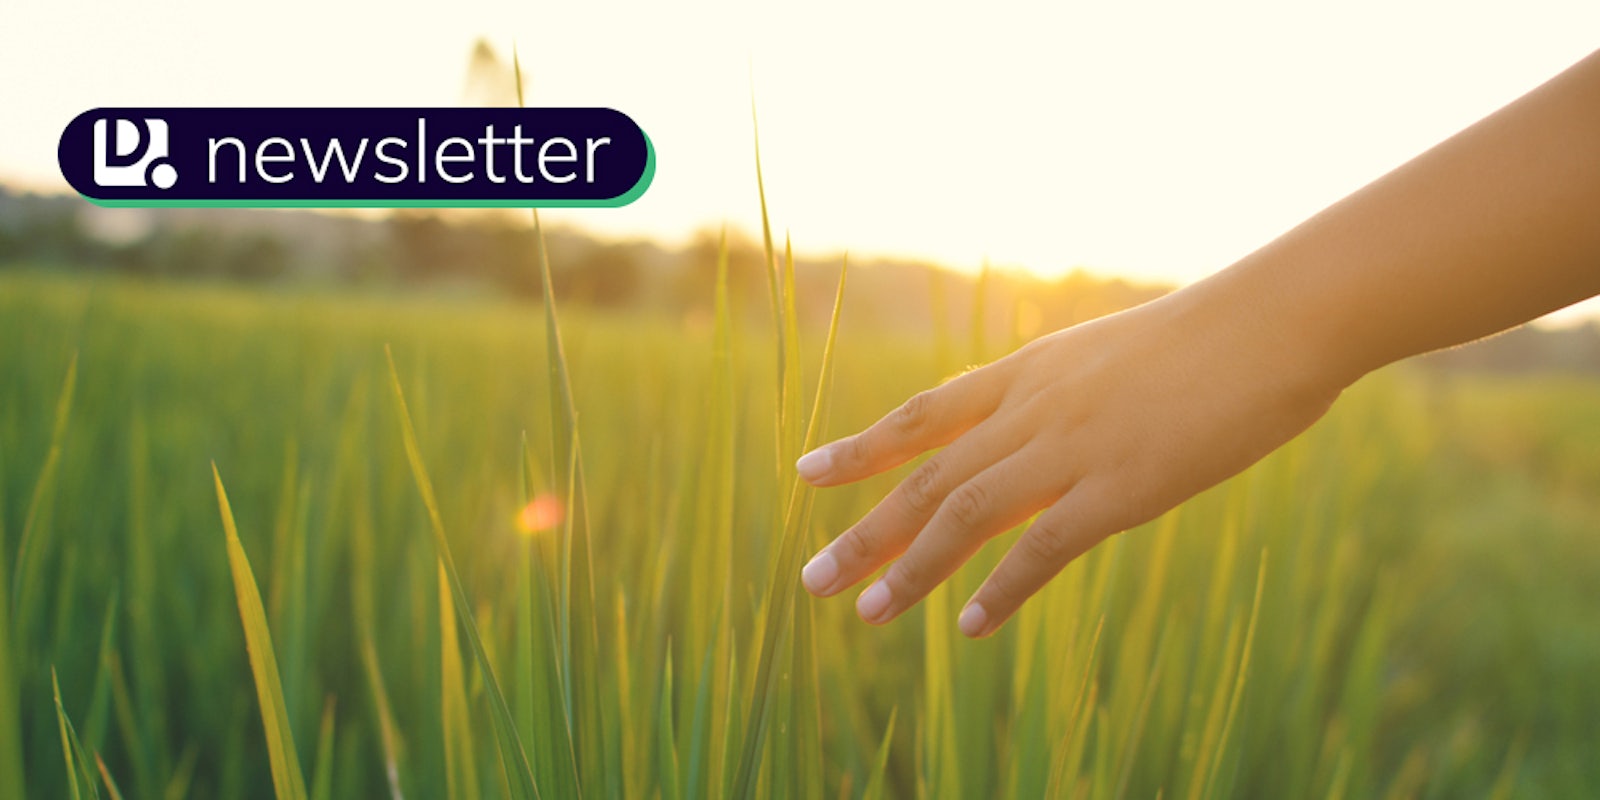 A Young hand touch green grass on a field at sunset. In the top left corner is the Daily Dot newsletter logo.